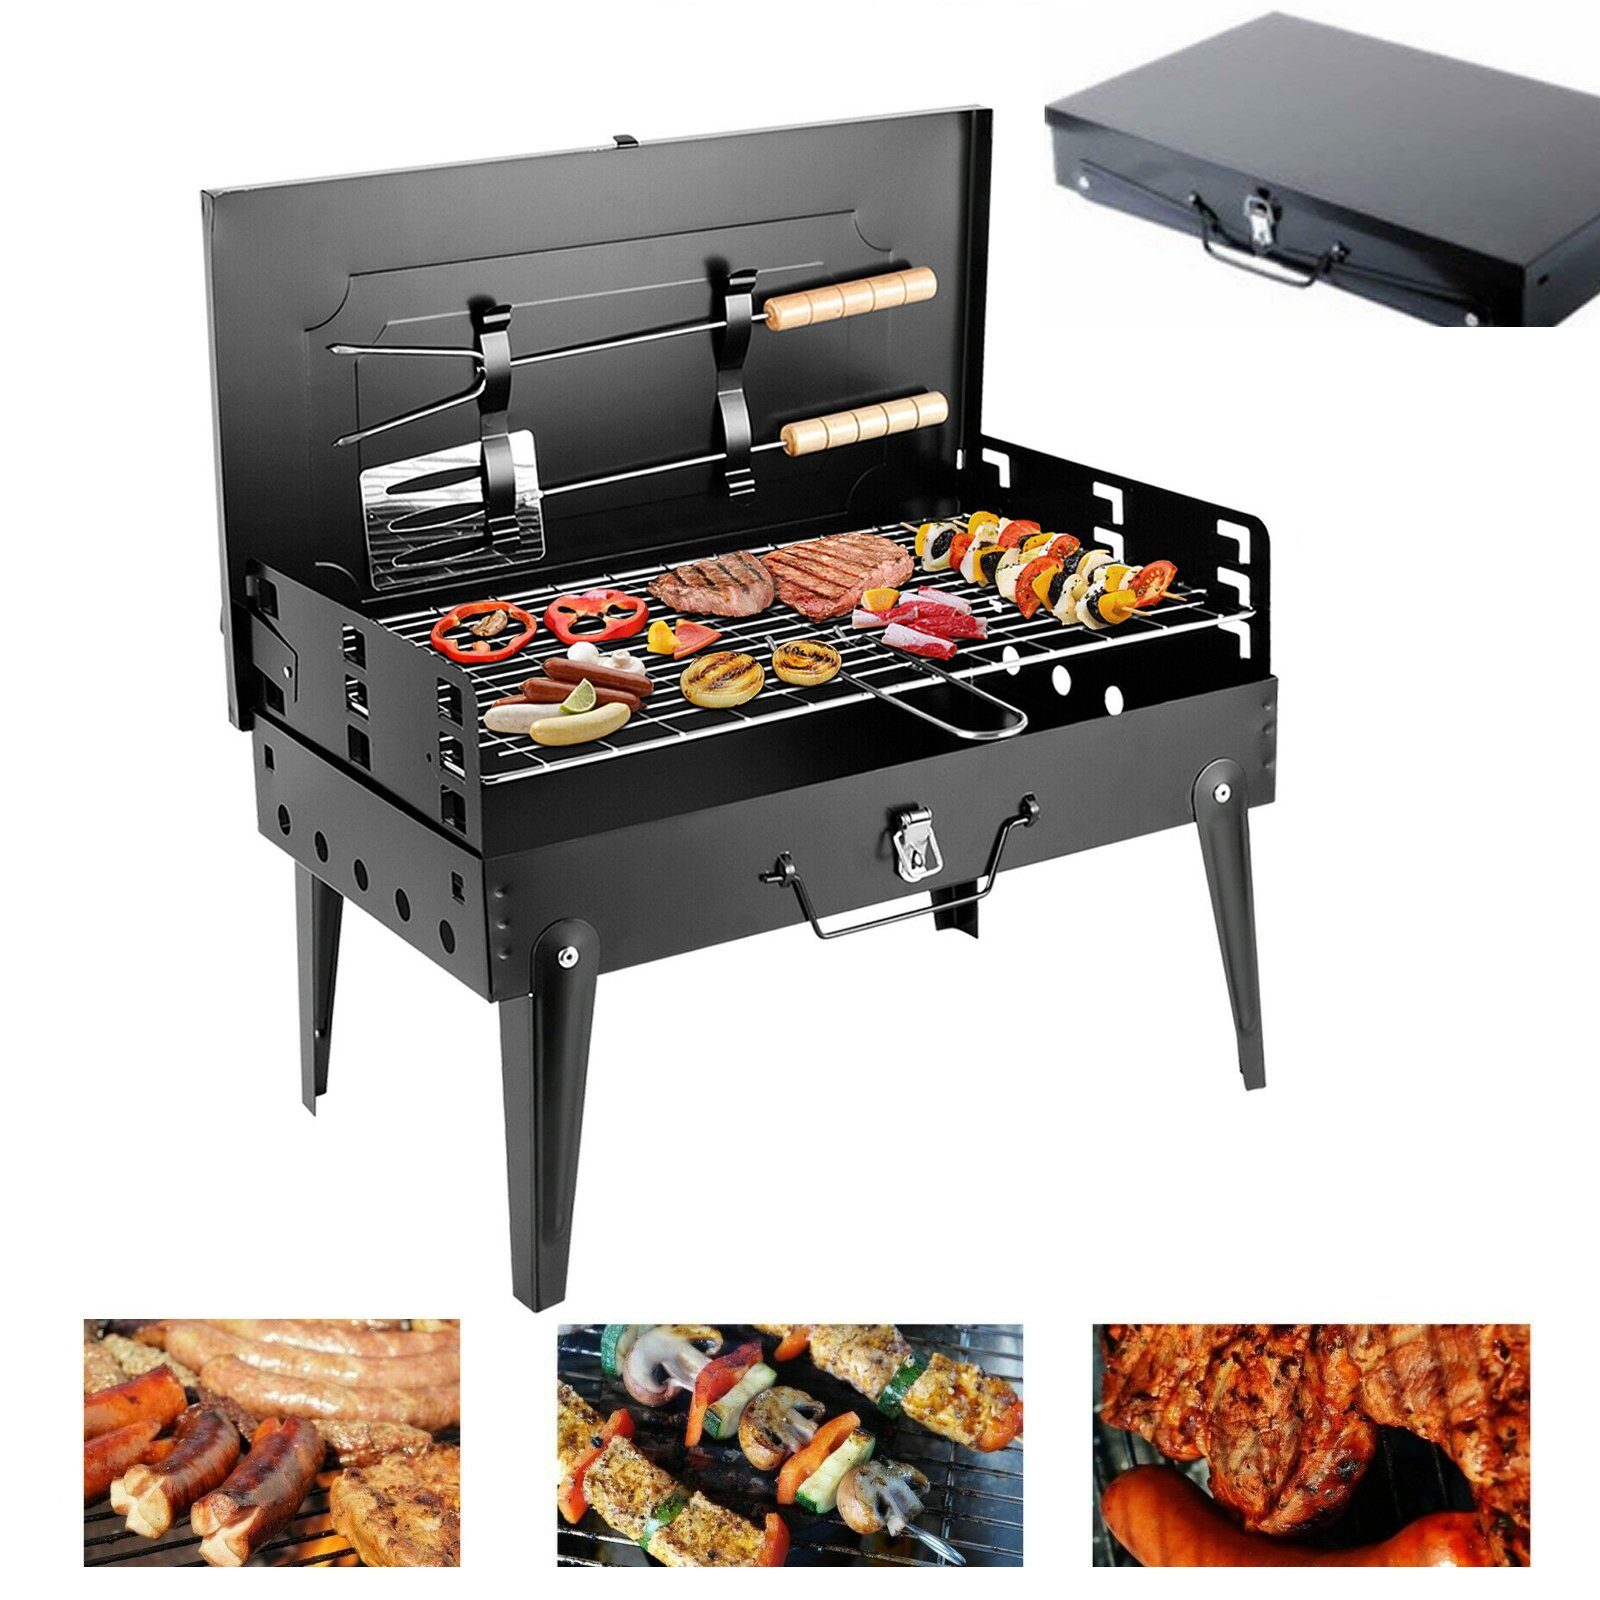 BQQ Tragbarer Klappgrill Holzkohlegrill Outdoor Camping Barbecue Grill Faltbar 